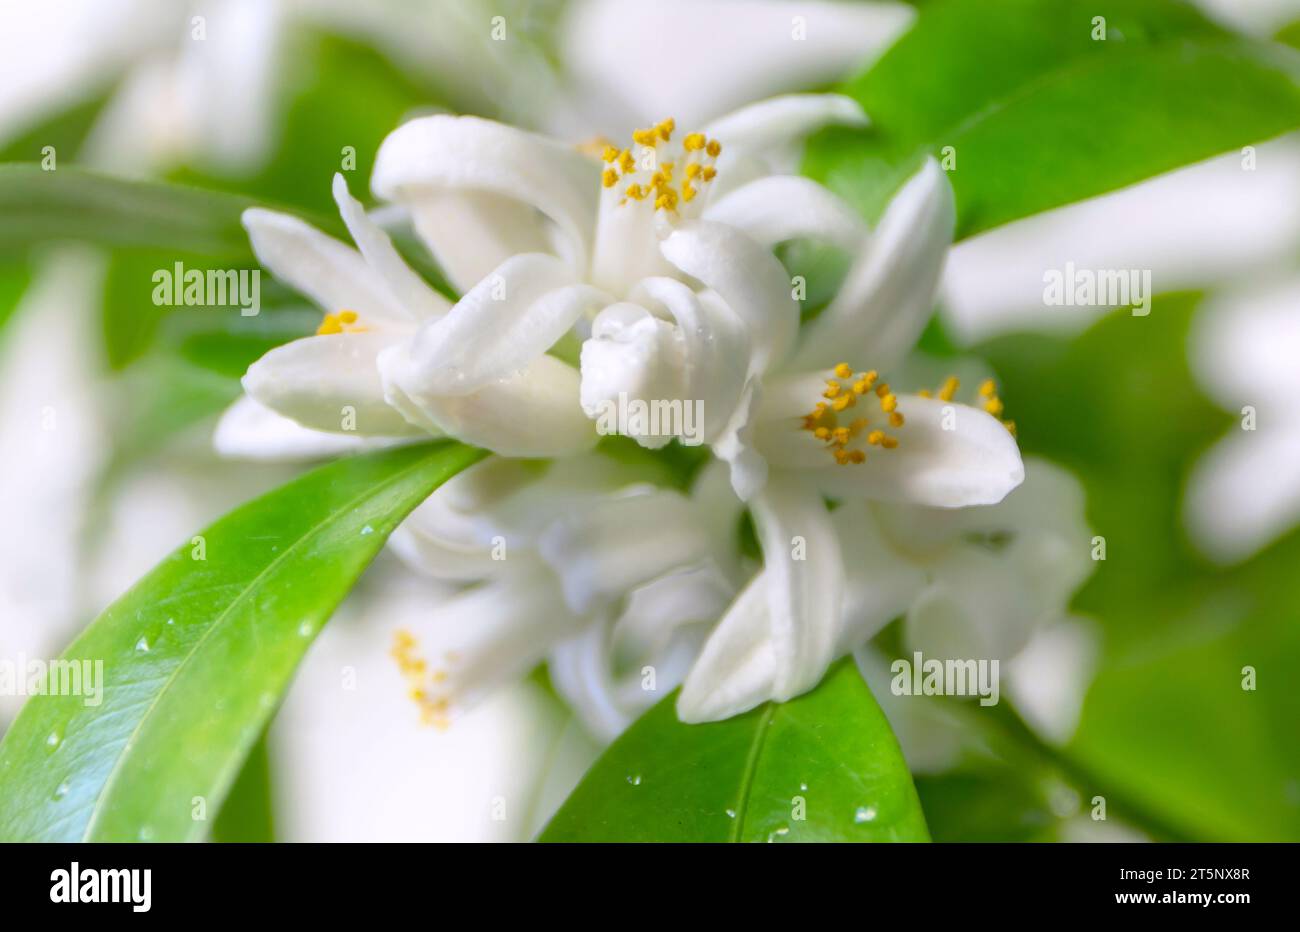 Orange tree white flowers and buds bunch with water drops. Calamondin blossom on the blurred garden background. Stock Photo